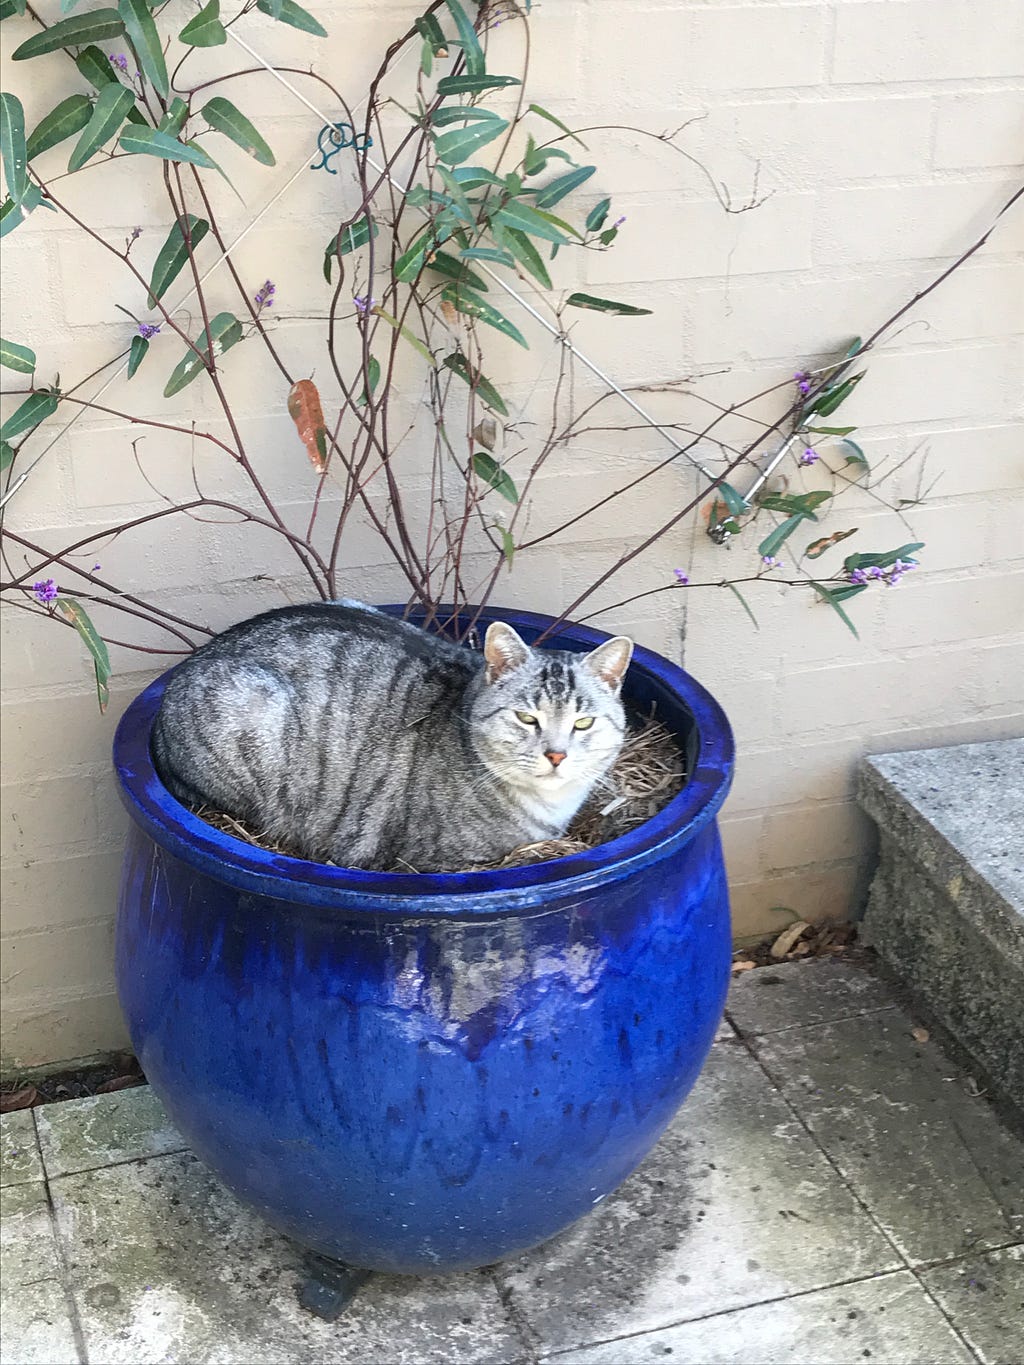 silver haired tabby cat resting in a blue terracotta pot